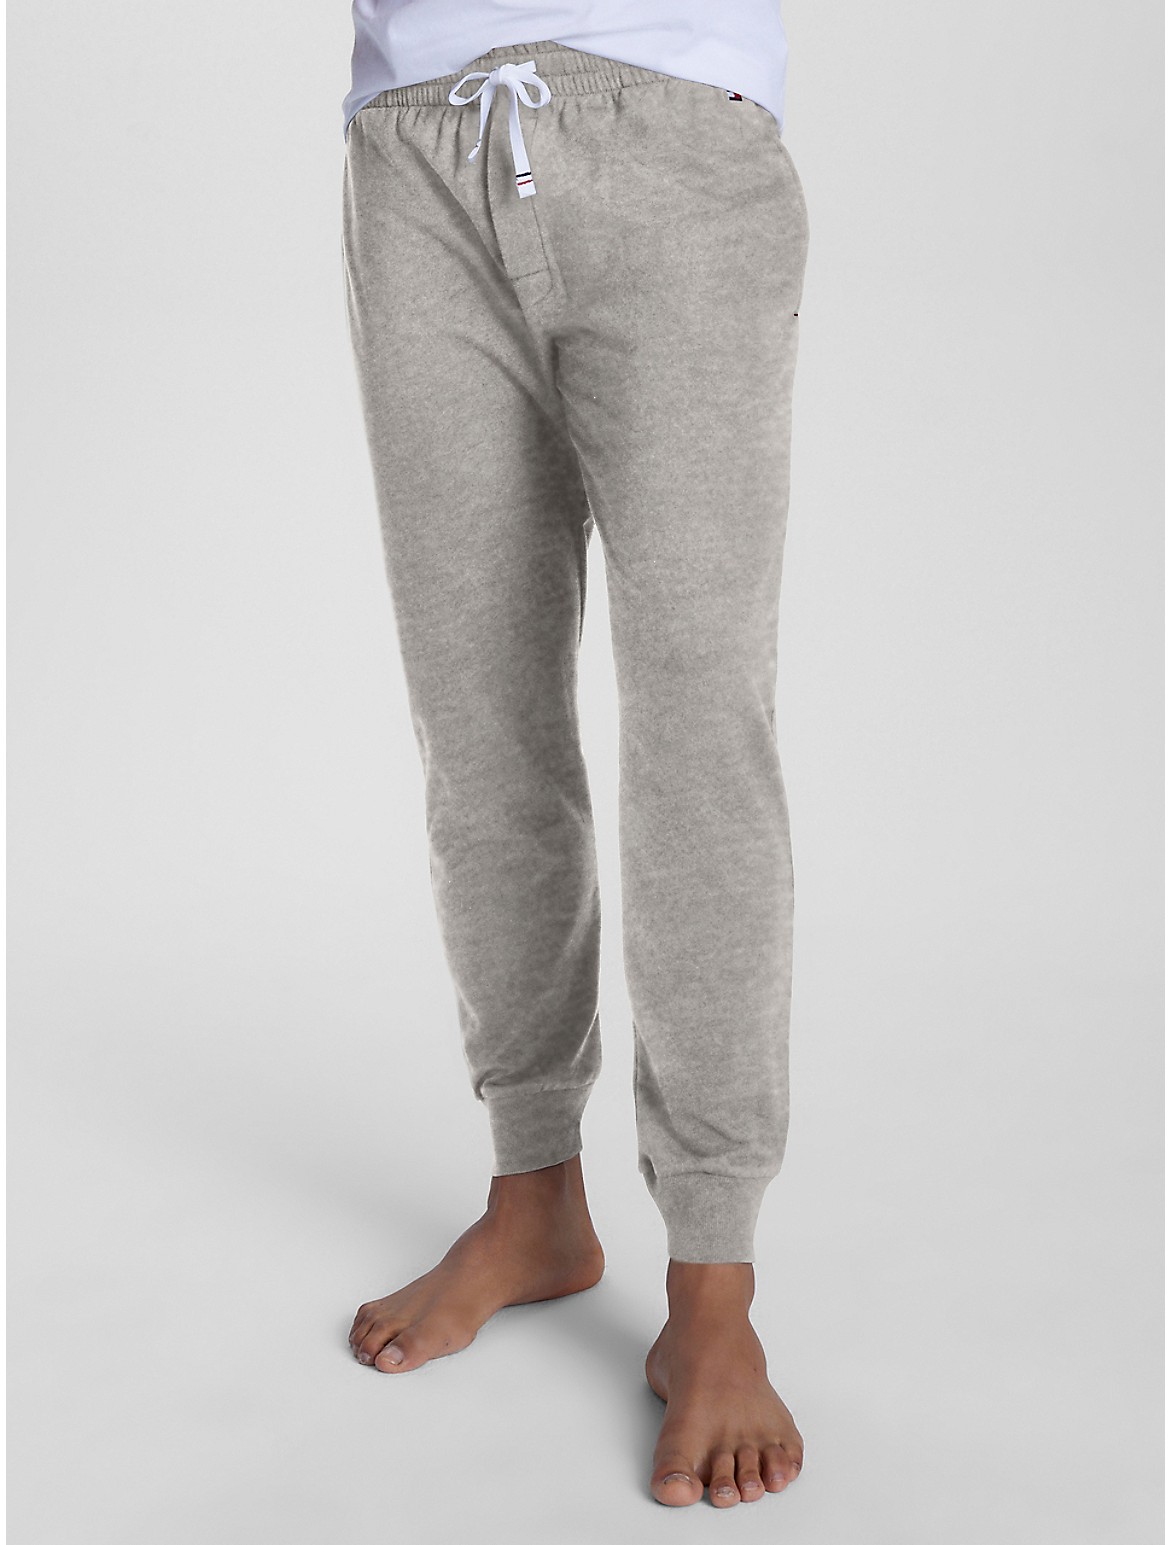 Tommy Hilfiger Men's Terry Lounge Jogger